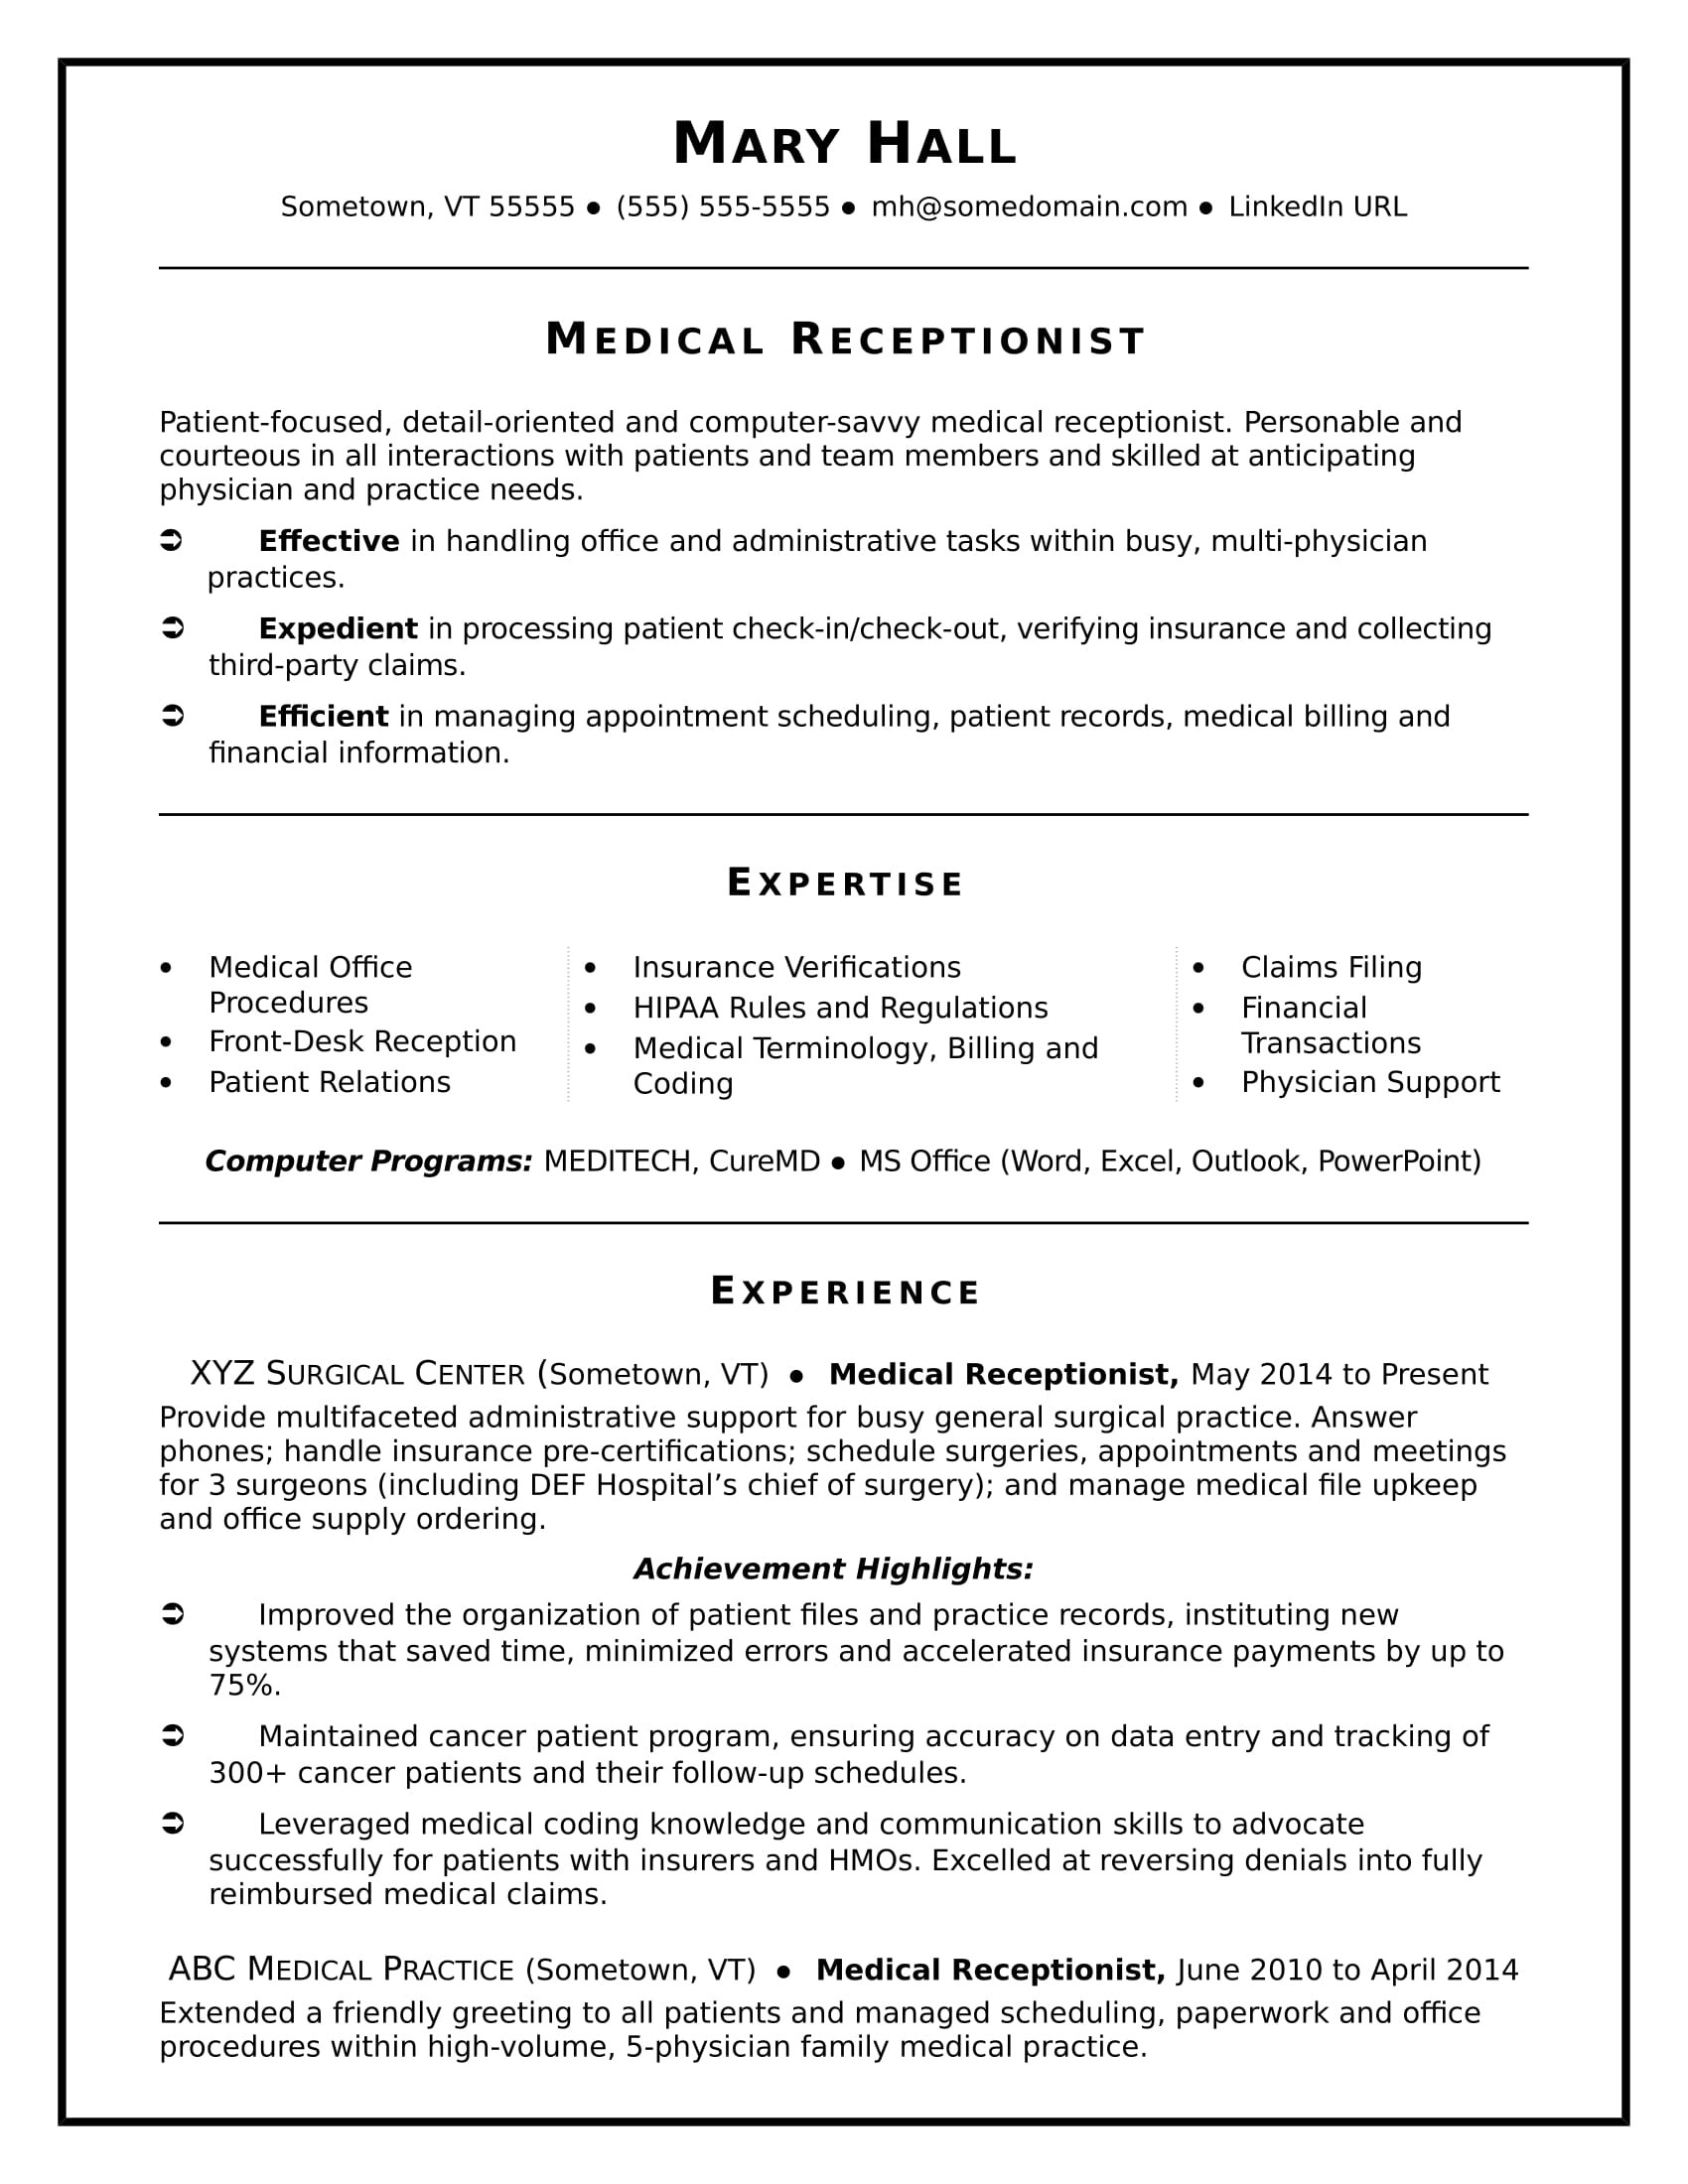 Sample Resume for Front Office Receptionist Medical Receptionist Resume Sample Monster.com